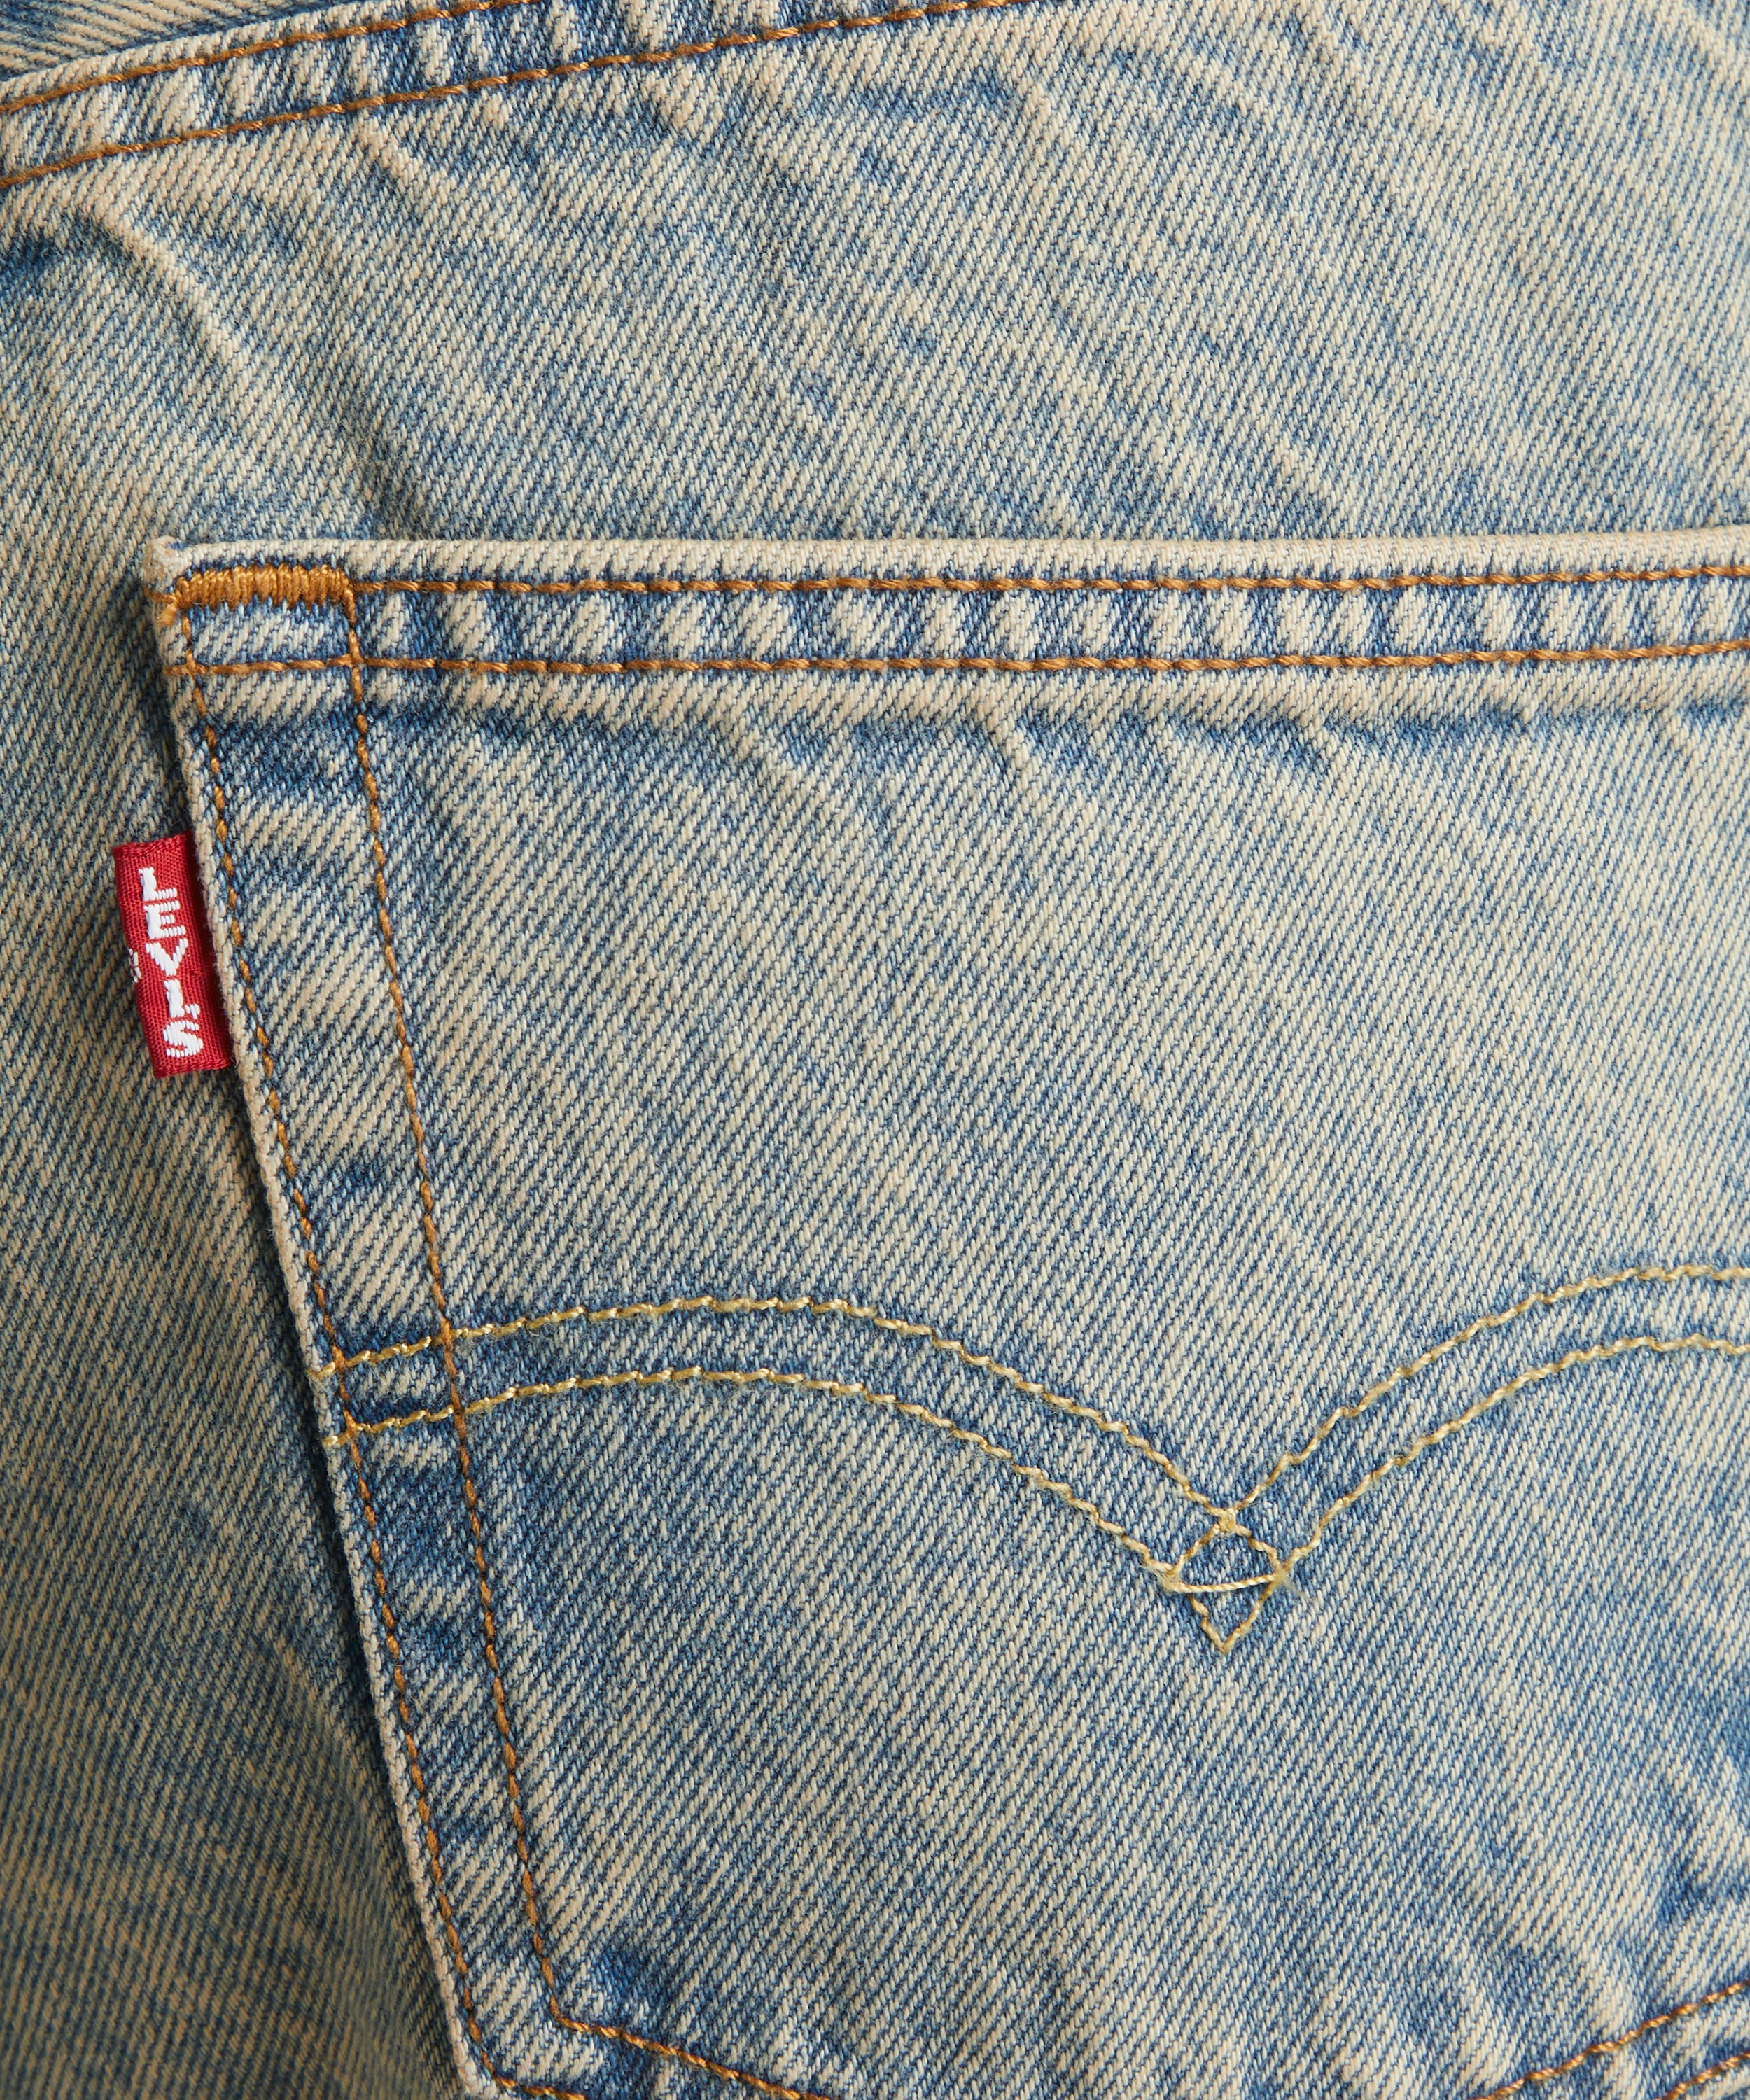 Levi's Red Tab - 501® Straight Leg ‘90s Jeans in Where’s the Tint image number 4